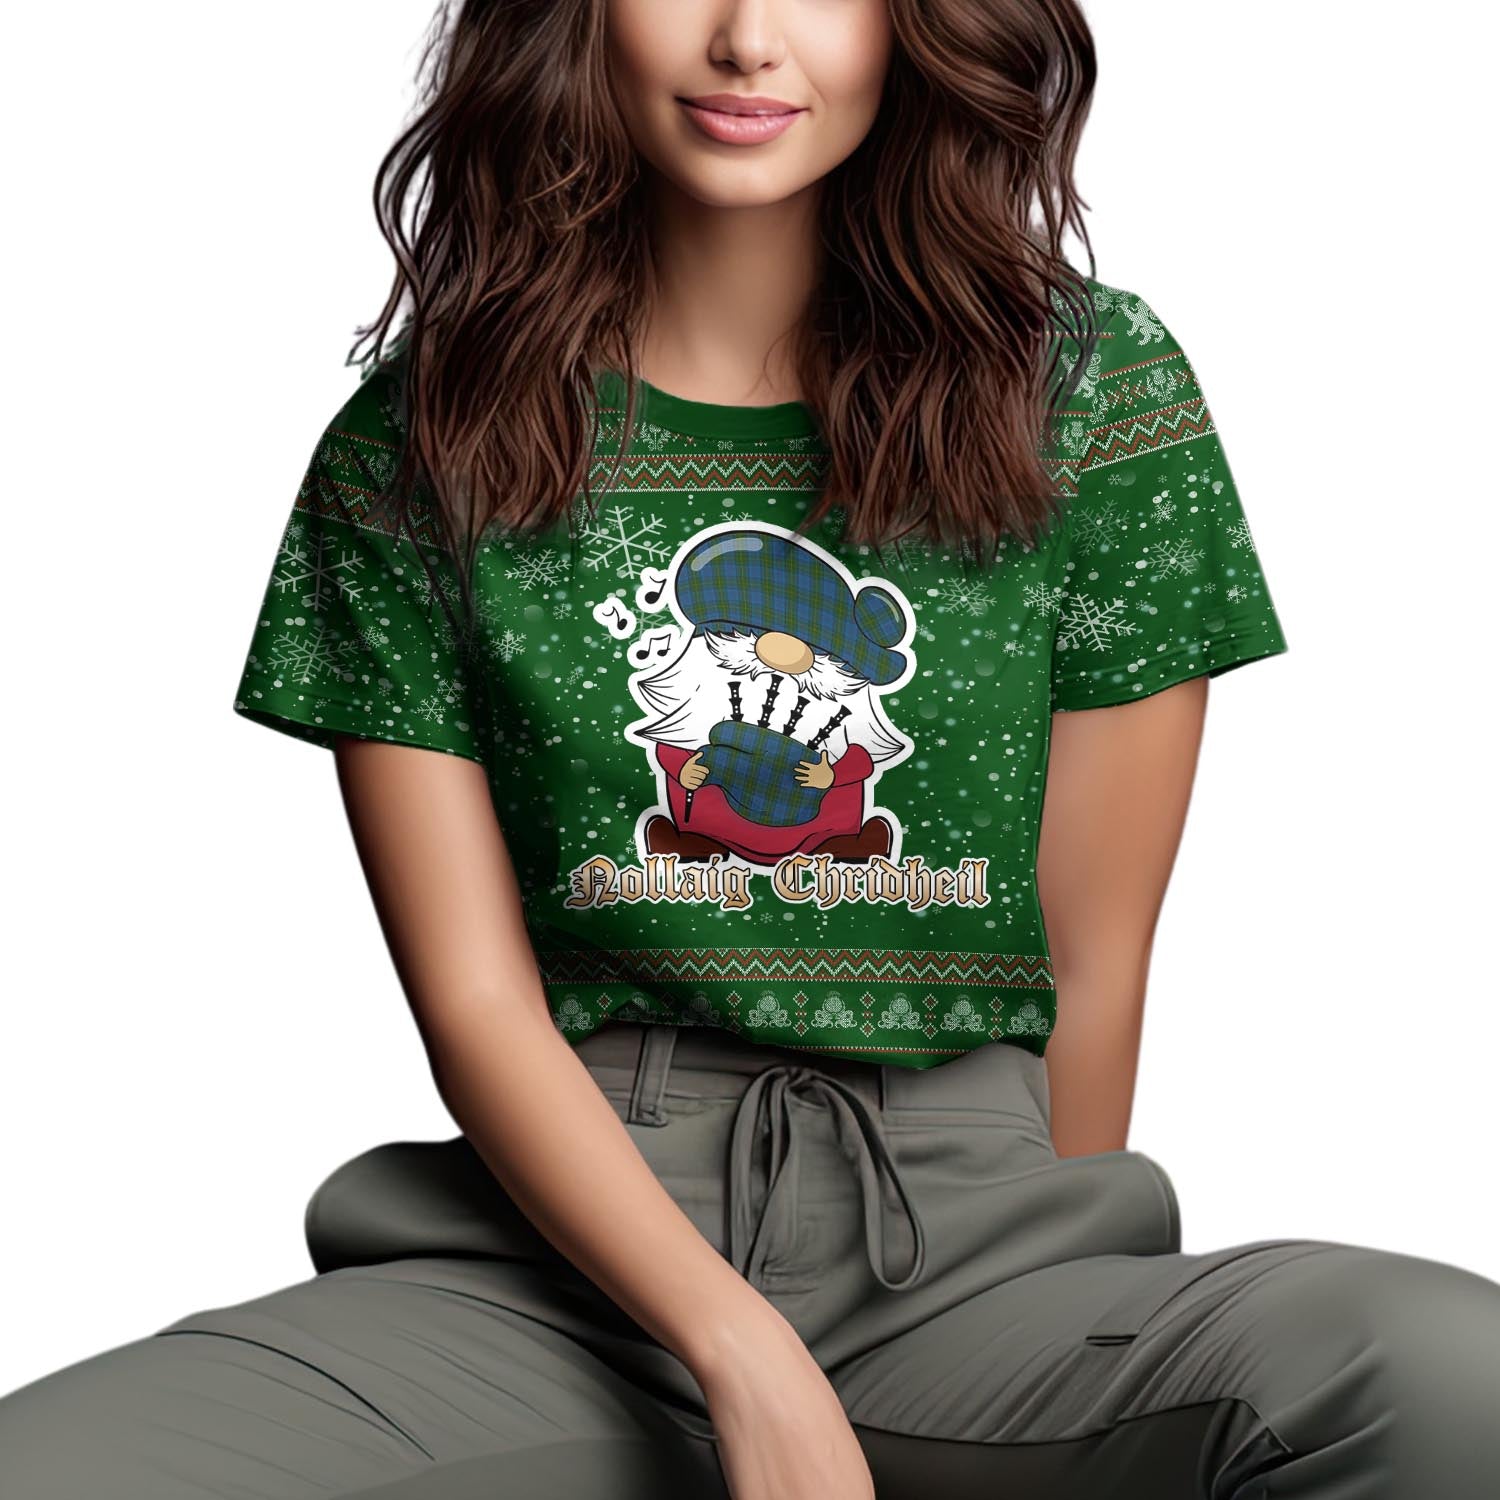 Donegal County Ireland Clan Christmas Family T-Shirt with Funny Gnome Playing Bagpipes Women's Shirt Green - Tartanvibesclothing